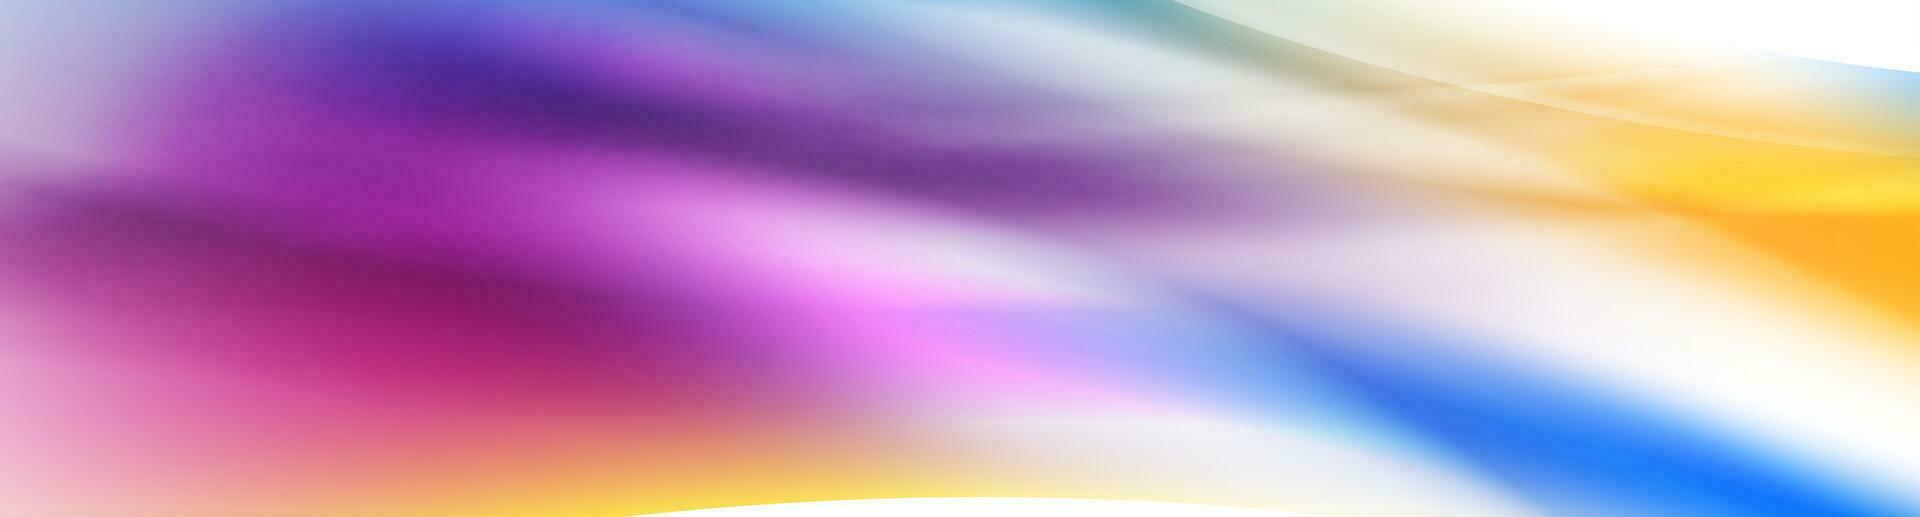 Colorful smooth blurred shiny waves abstract background vector